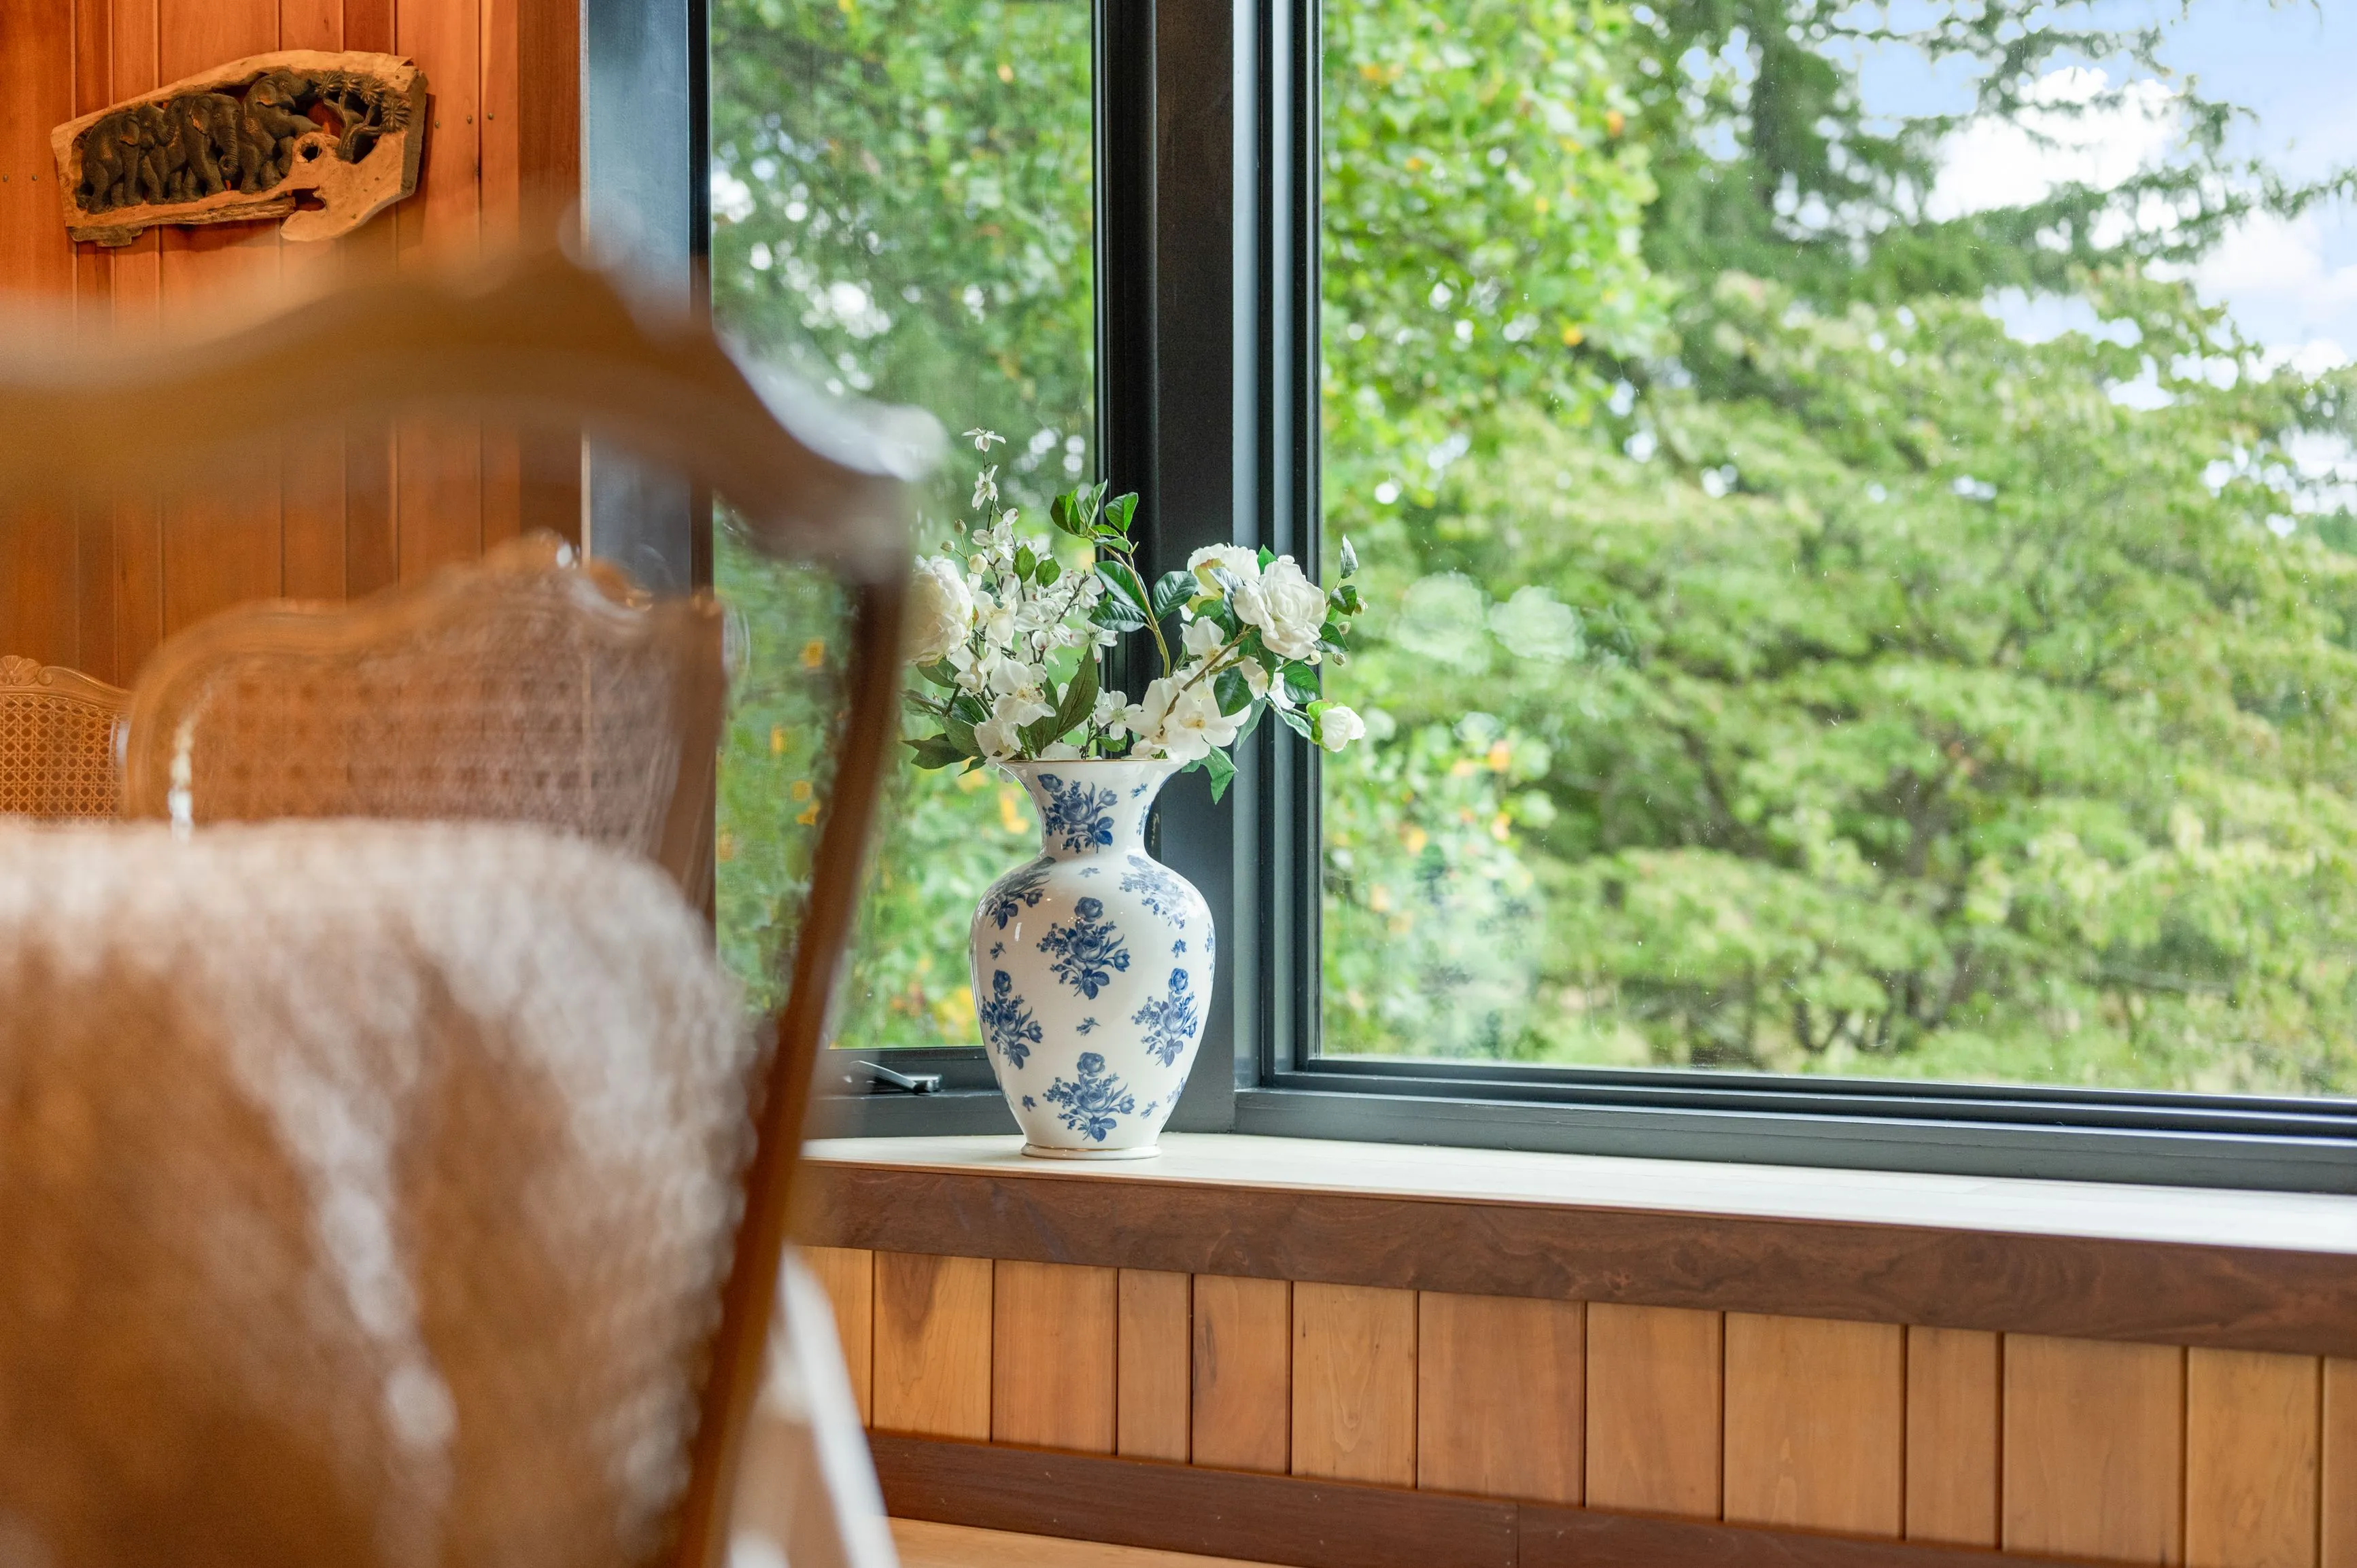 Vase with white flowers on a windowsill overlooking green trees, with partial view of a wooden chair in the foreground.